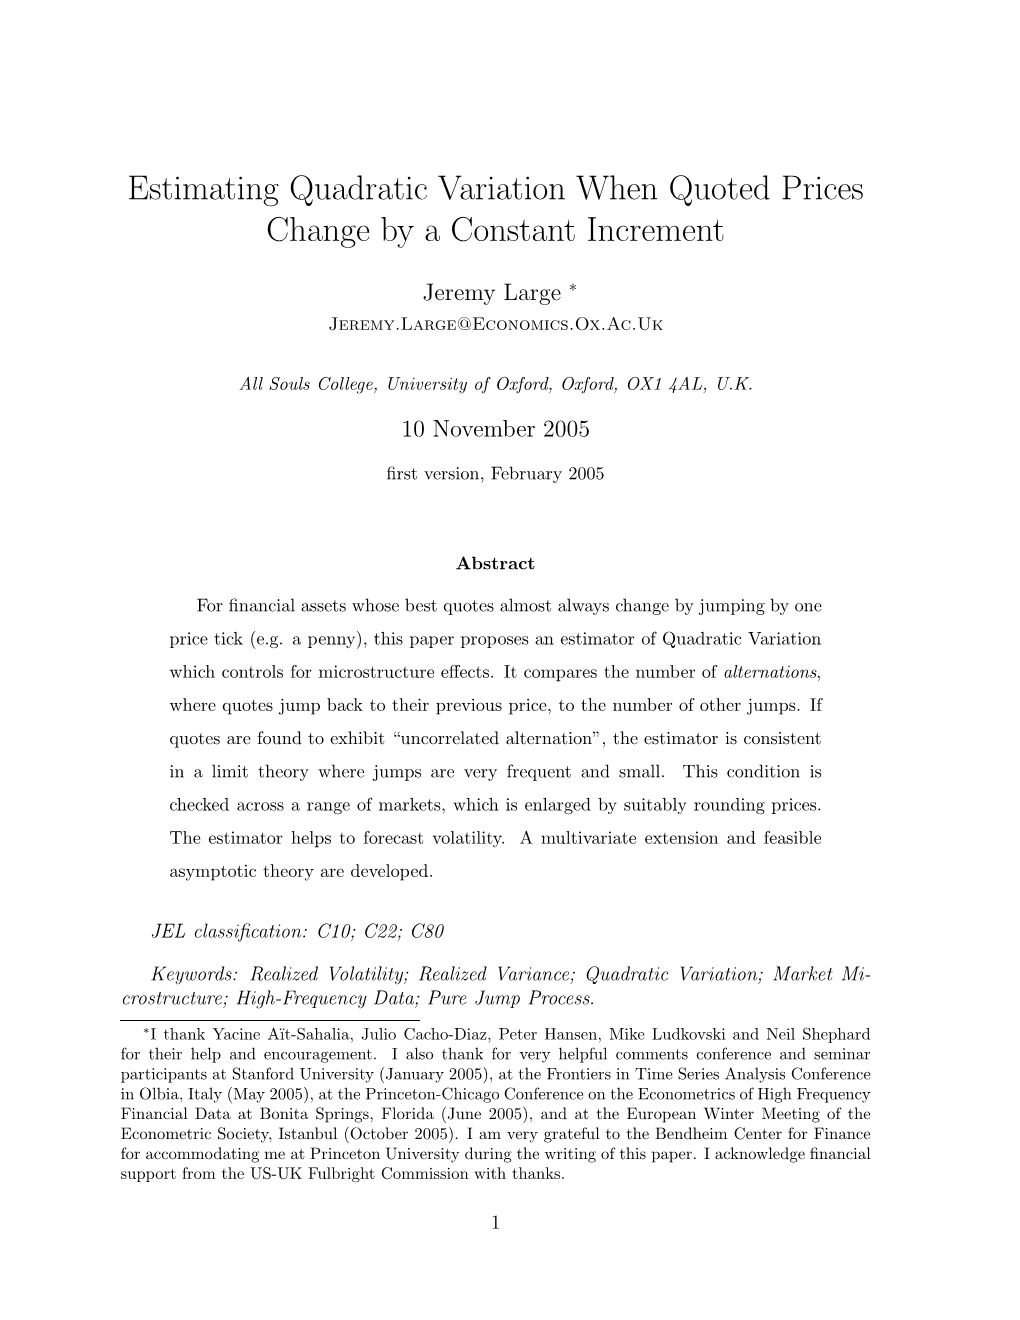 Estimating Quadratic Variation When Quoted Prices Change by a Constant Increment